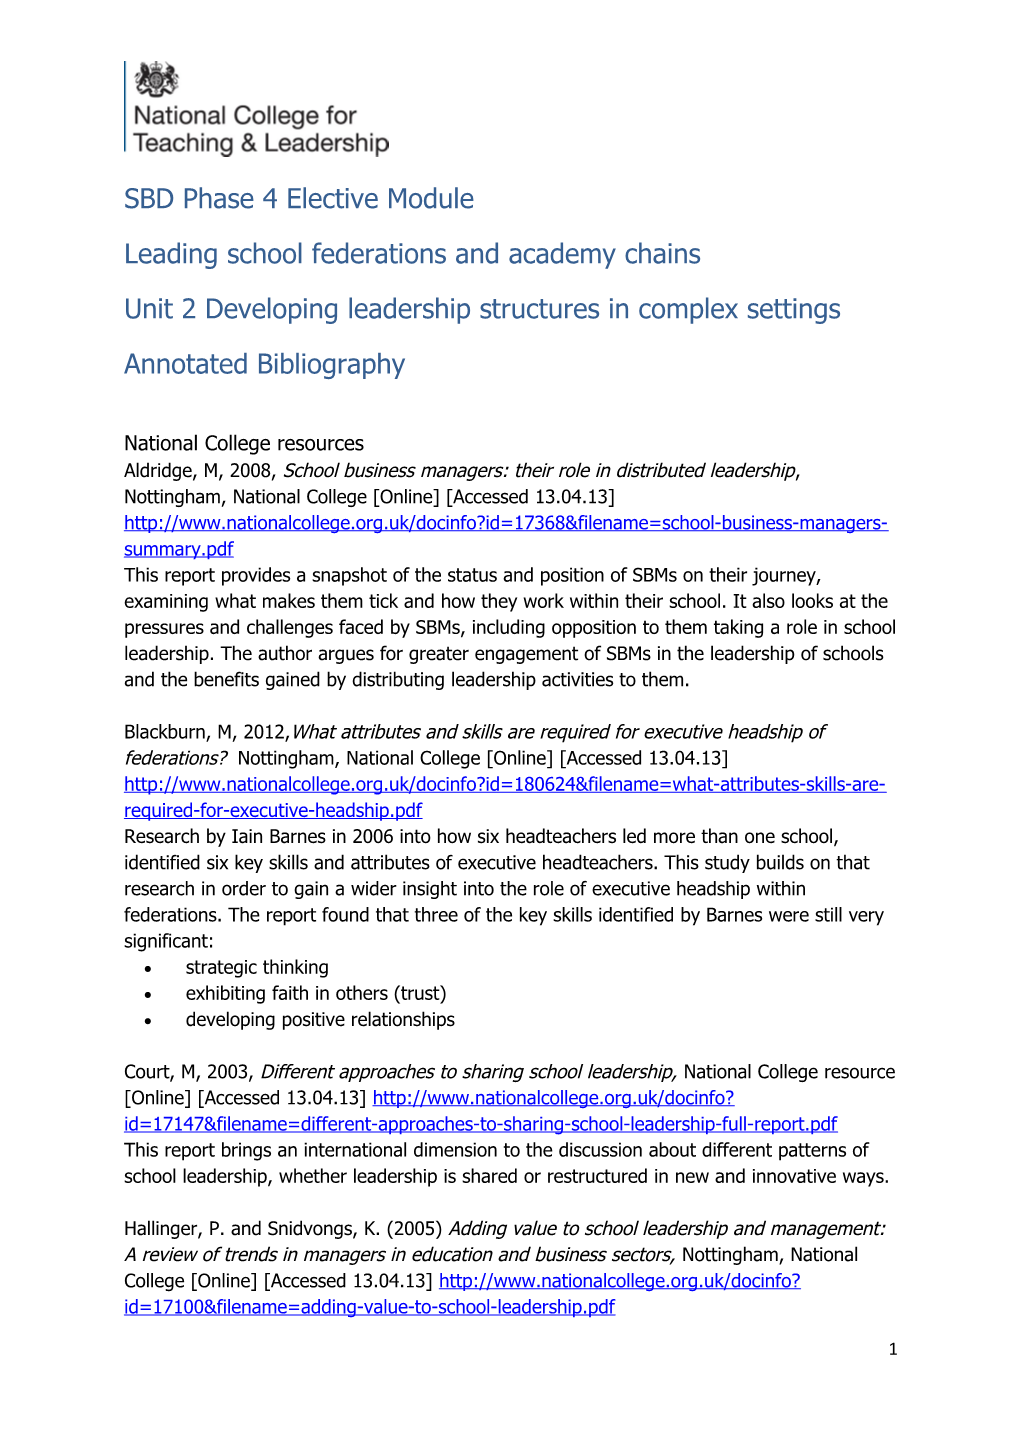 Federations and Academies Unit 2 Annotated Bibliography